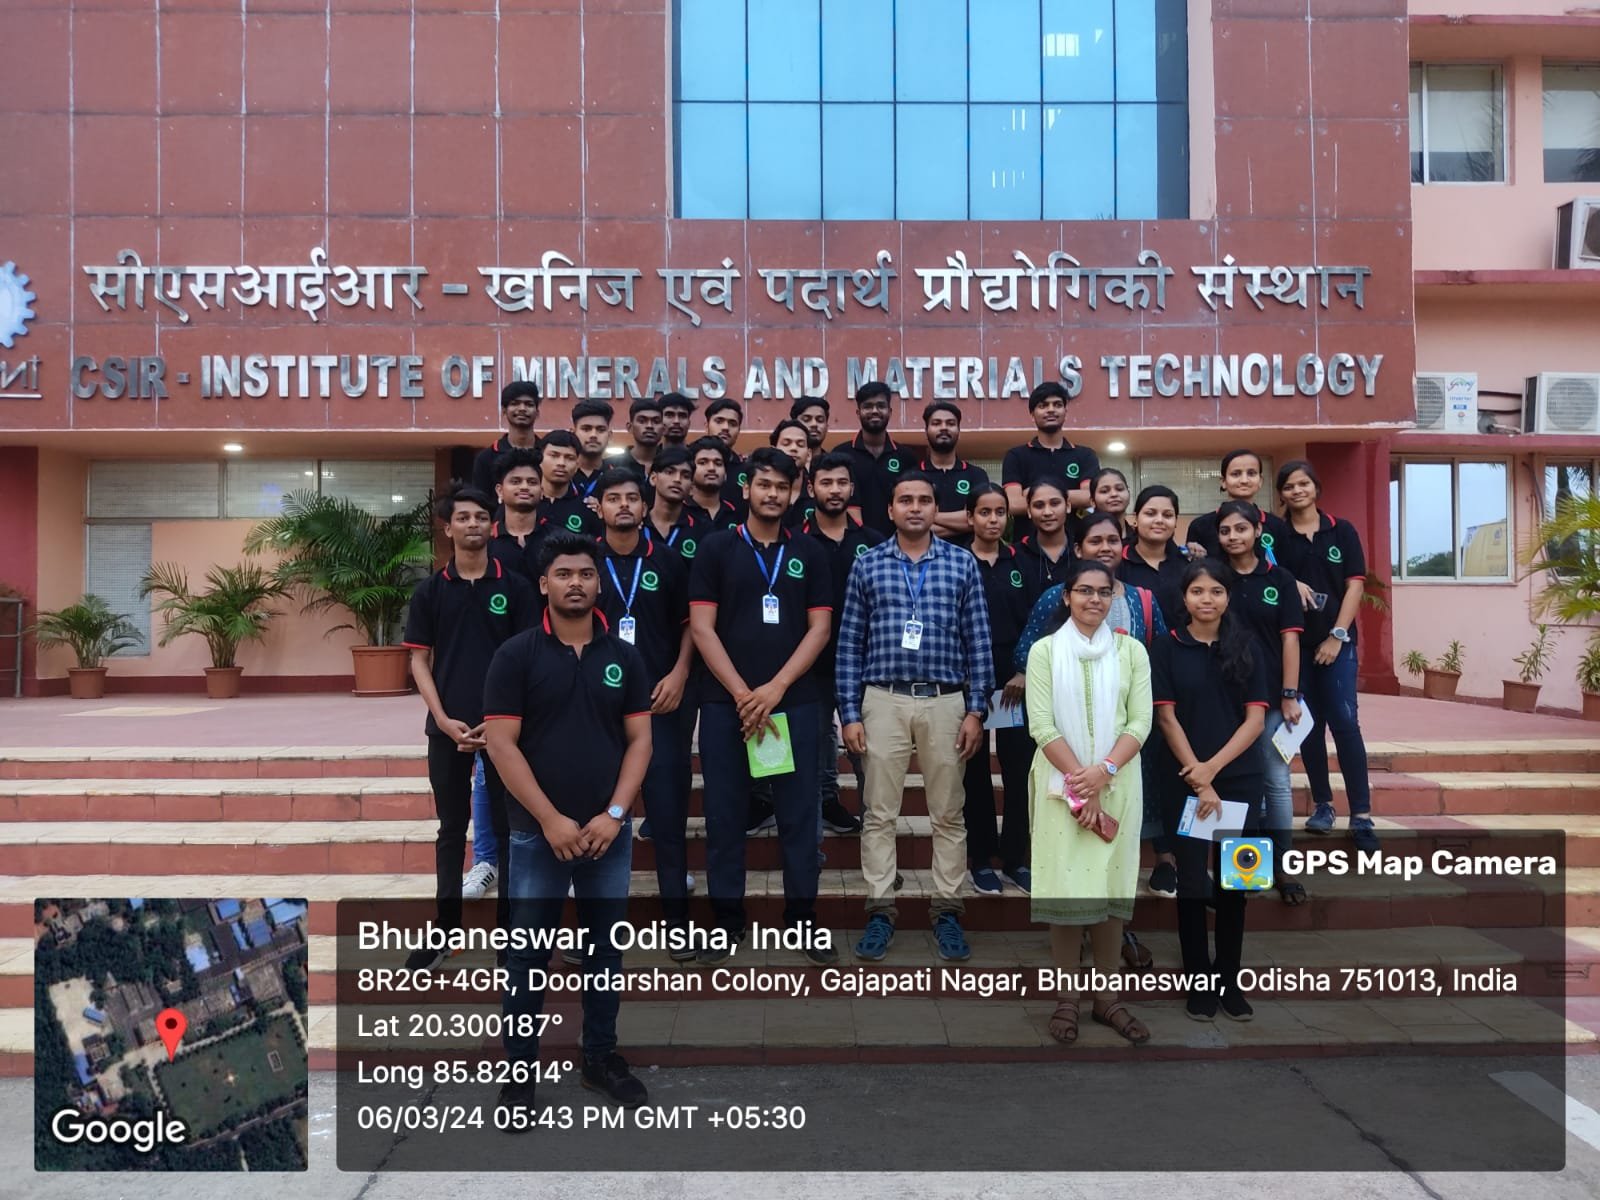 Skill Development Program attended by GITAM Students on March 6, 2024 at CSIR – Institute of Minerals and Materials Technology (IMMT) in Bhubaneswar